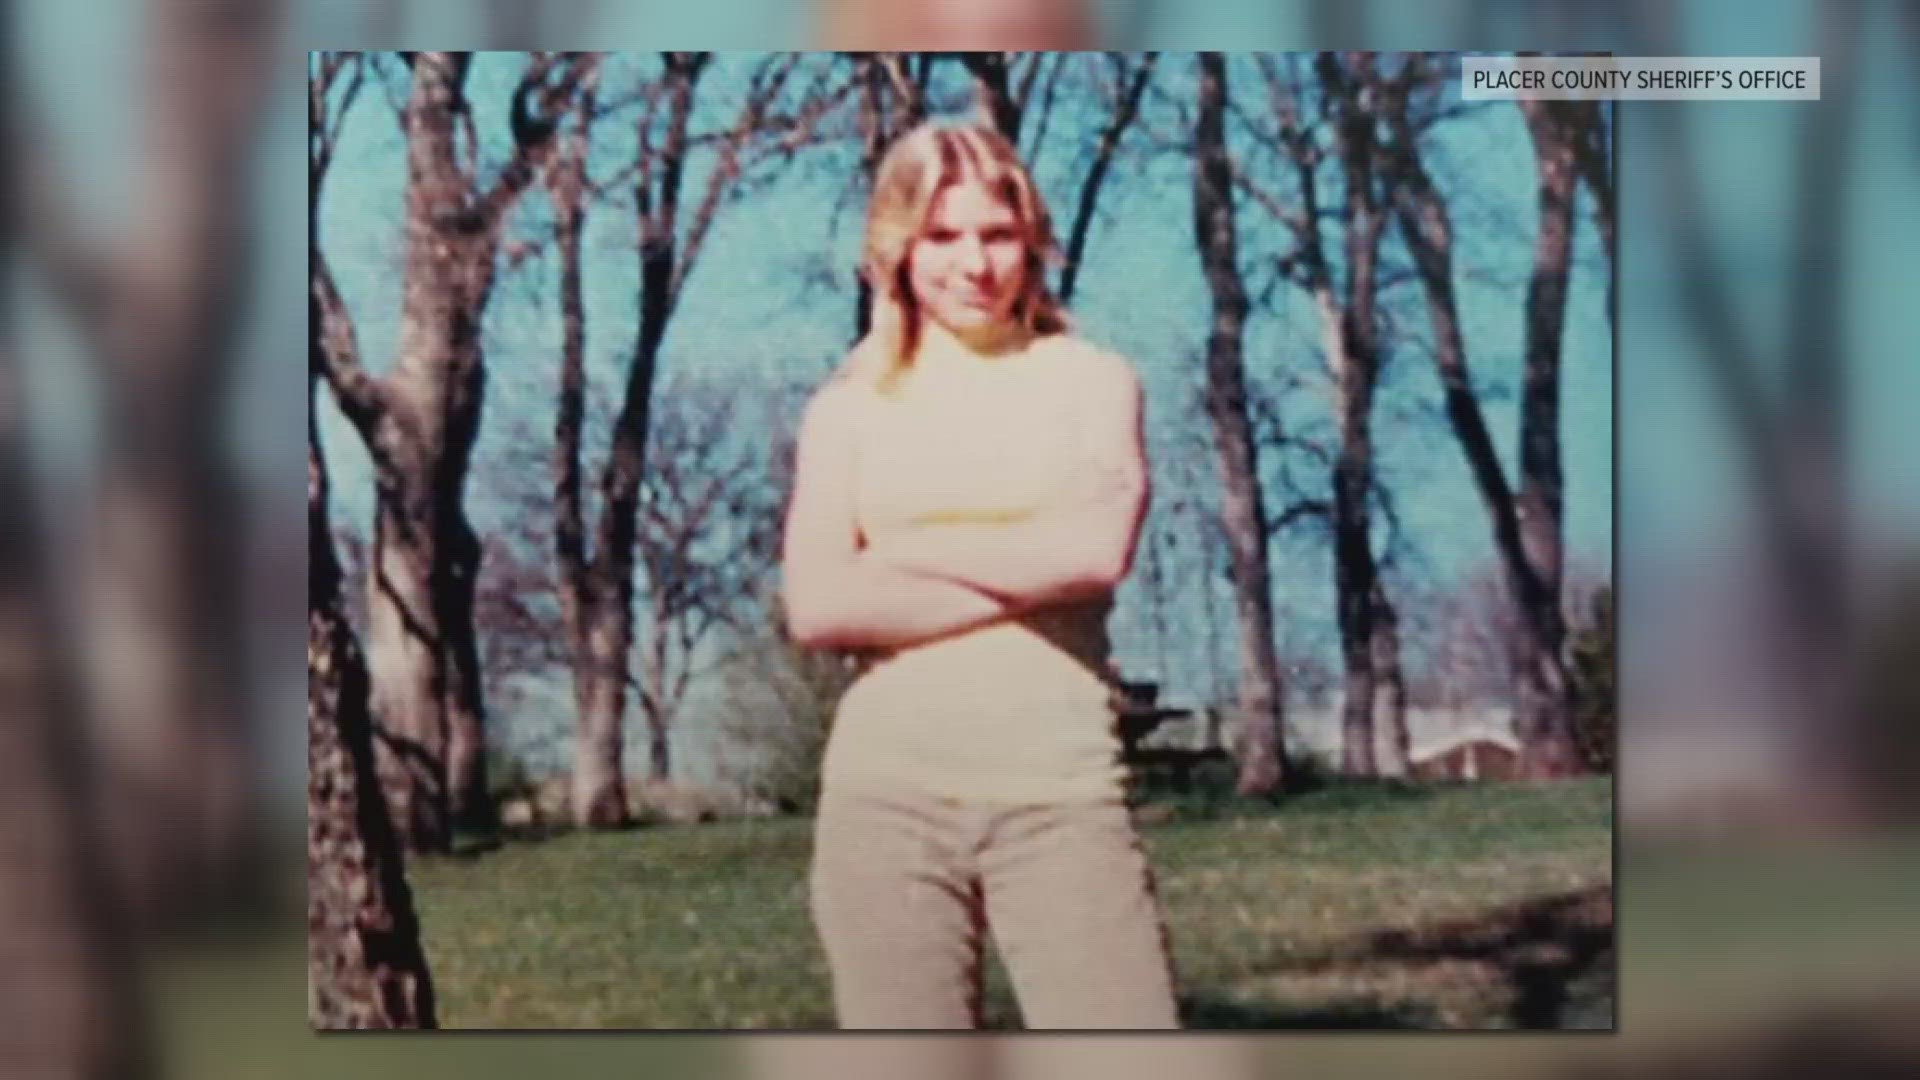 Patricia Ann Rose went missing in 1980. Her remains were discovered in January 1985. She wouldn’t be identified until January 2024.